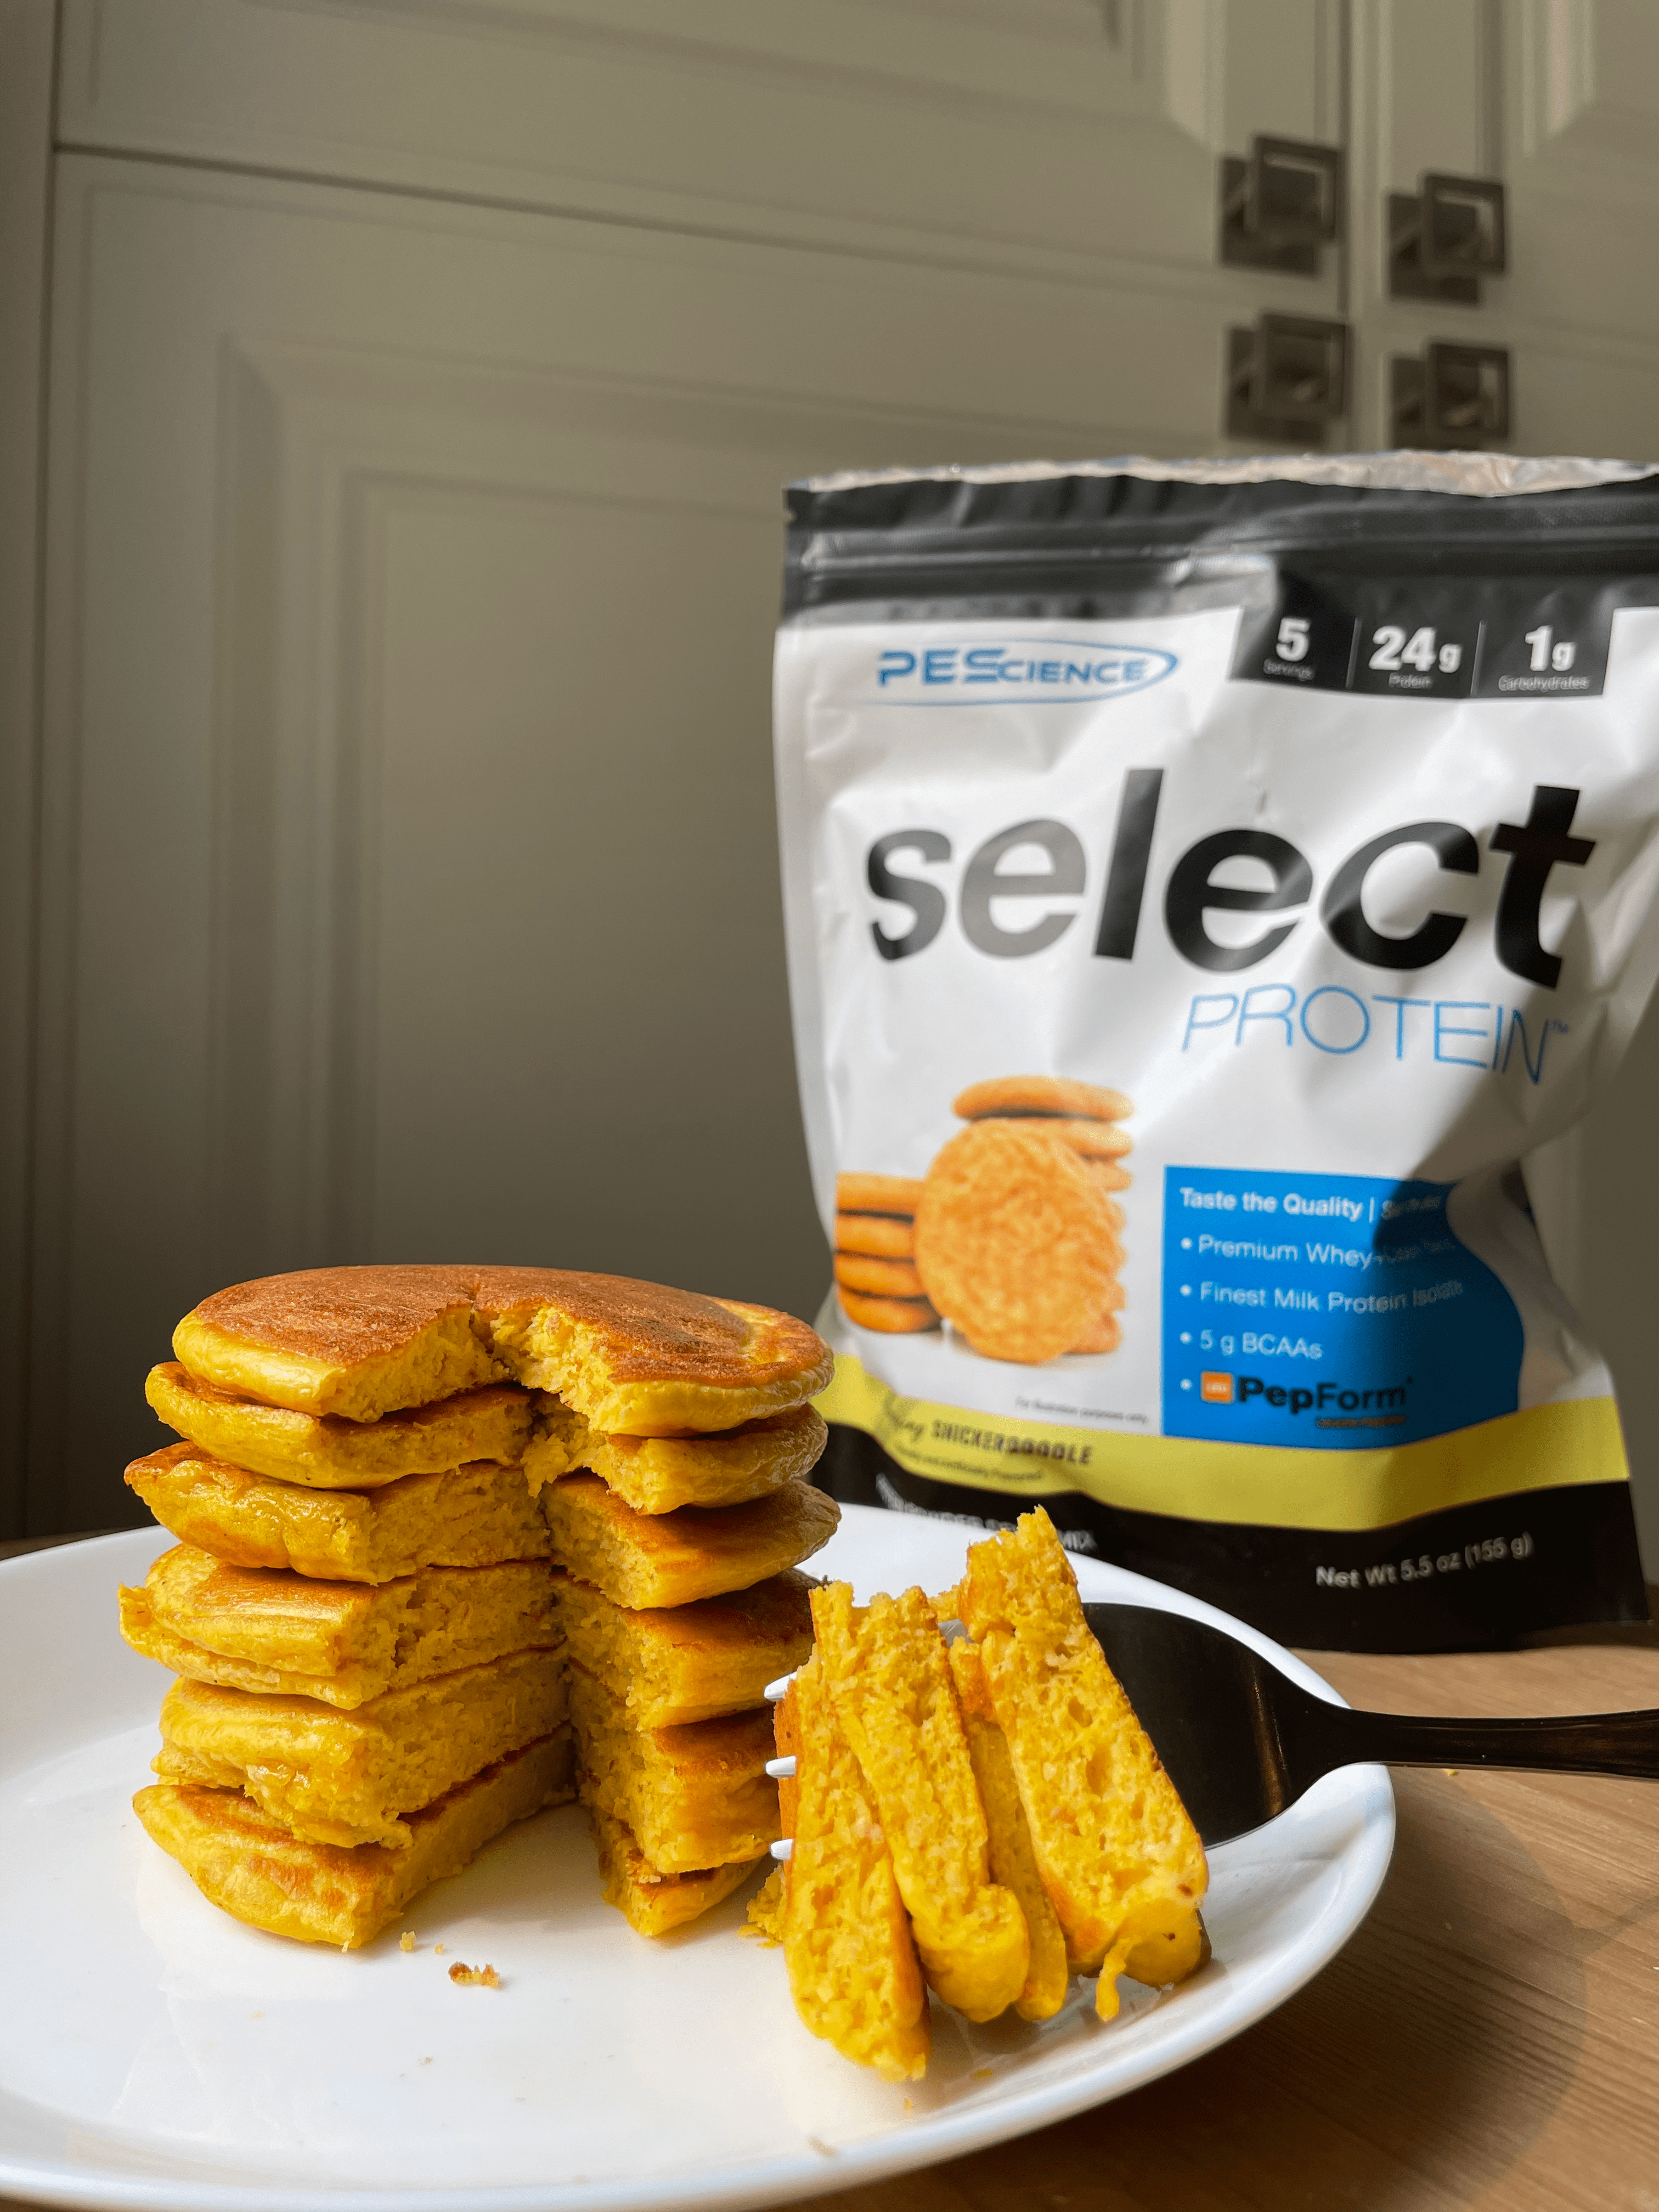 PEScience Select Protein Pumpkin Pancakes by imheatherr using Snickerdoodle flavour (276 calories, 32g protein)